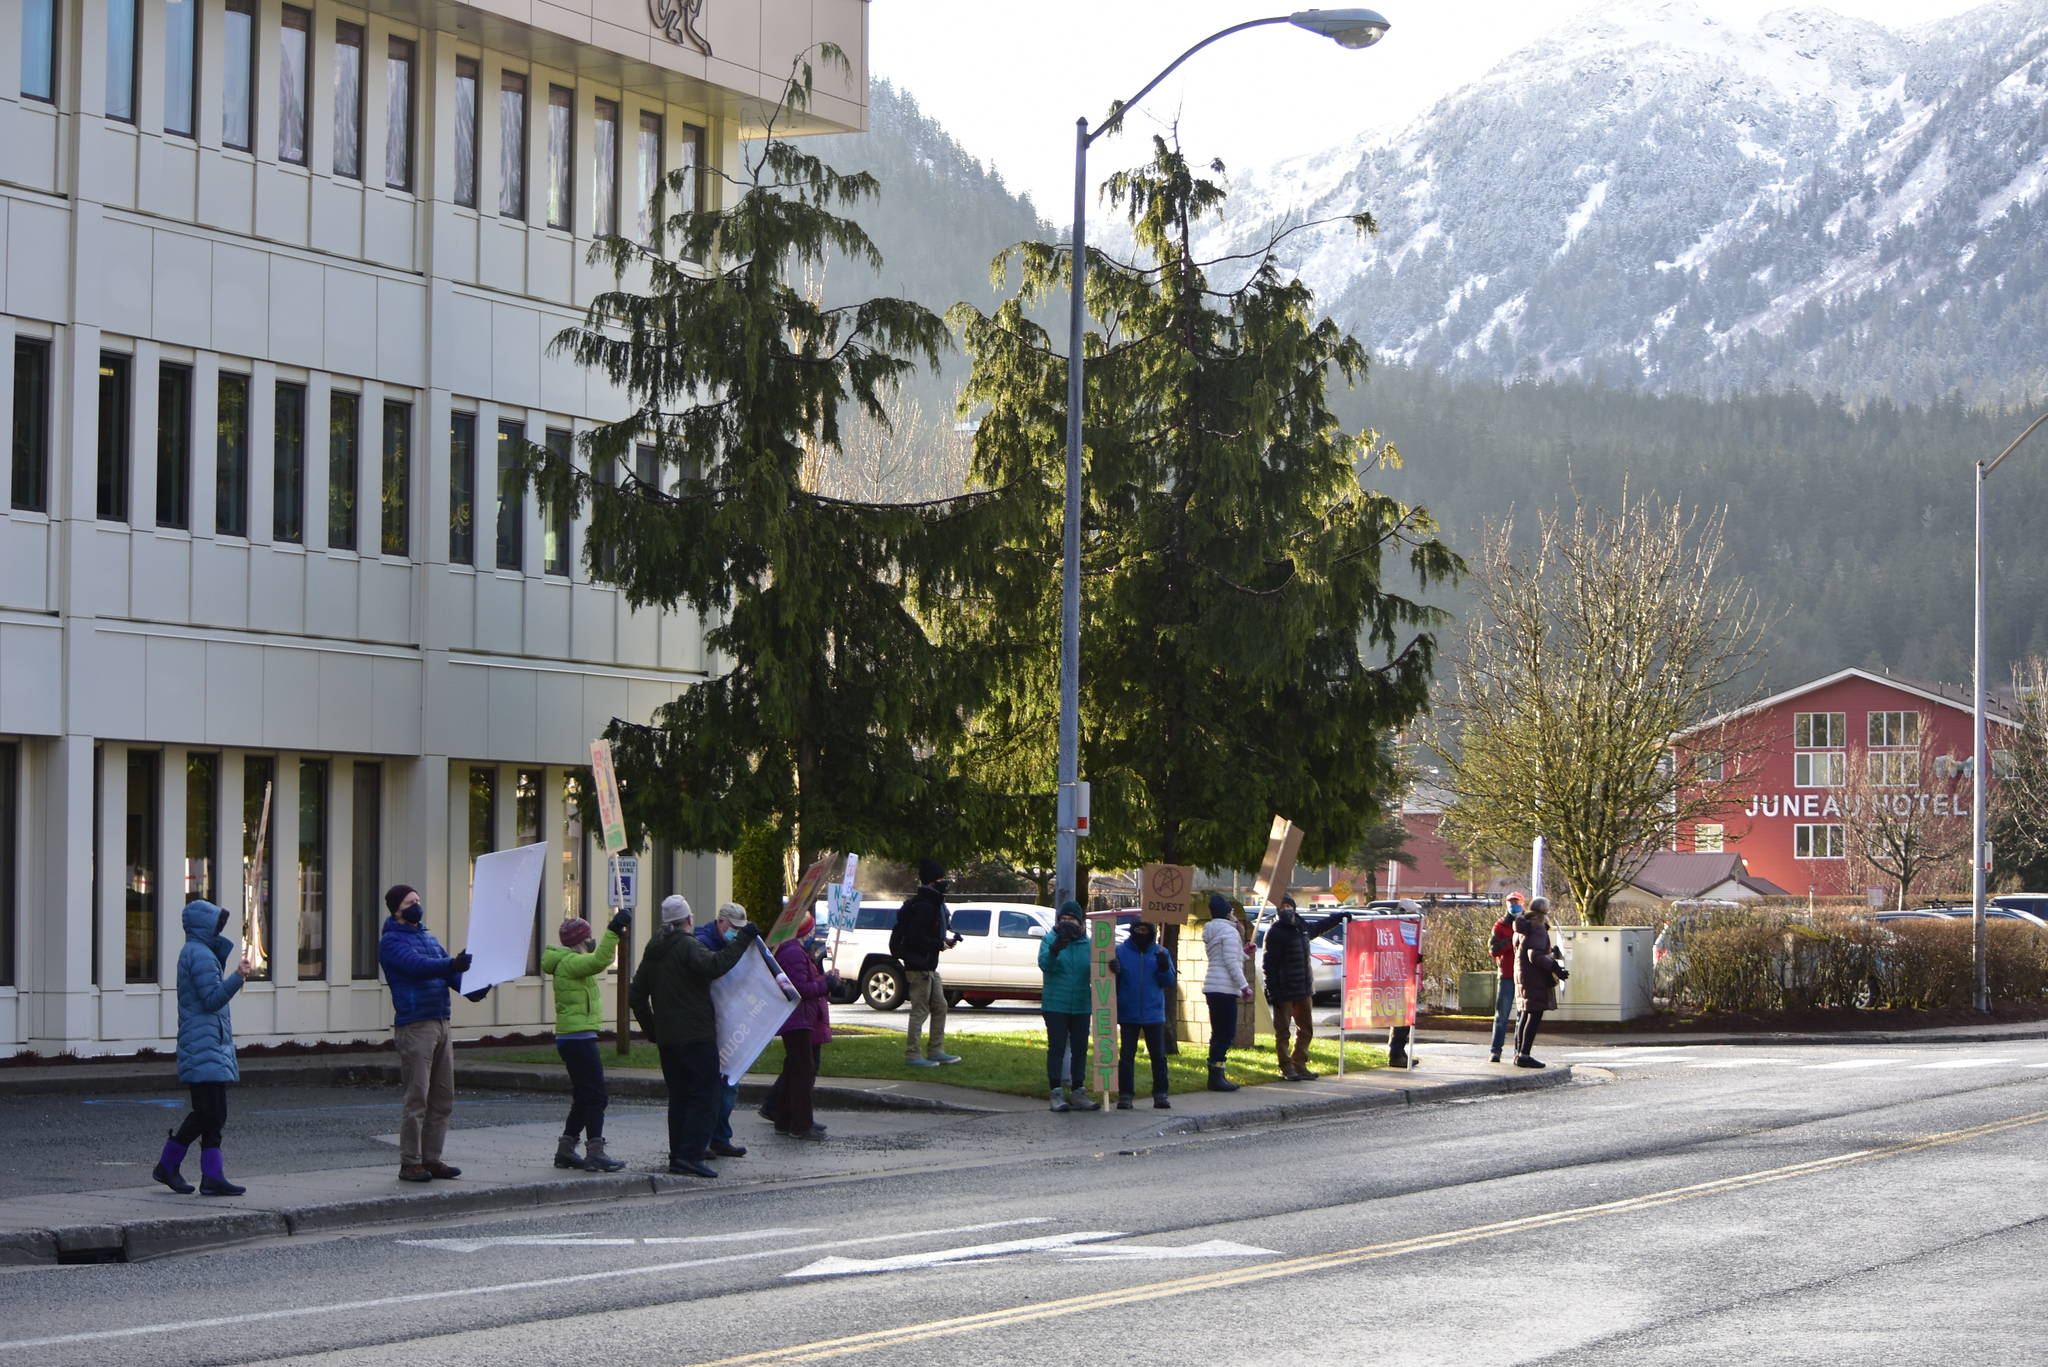 Environmentalists demonstrated in front of the Alaska Permanent Fund Corporation Wednesday, Dec. 9, 2020 calling on the Board of Trustees to divest the state’s wealth fund from fossil fuels. (Peter Segall / Juneau Empire)